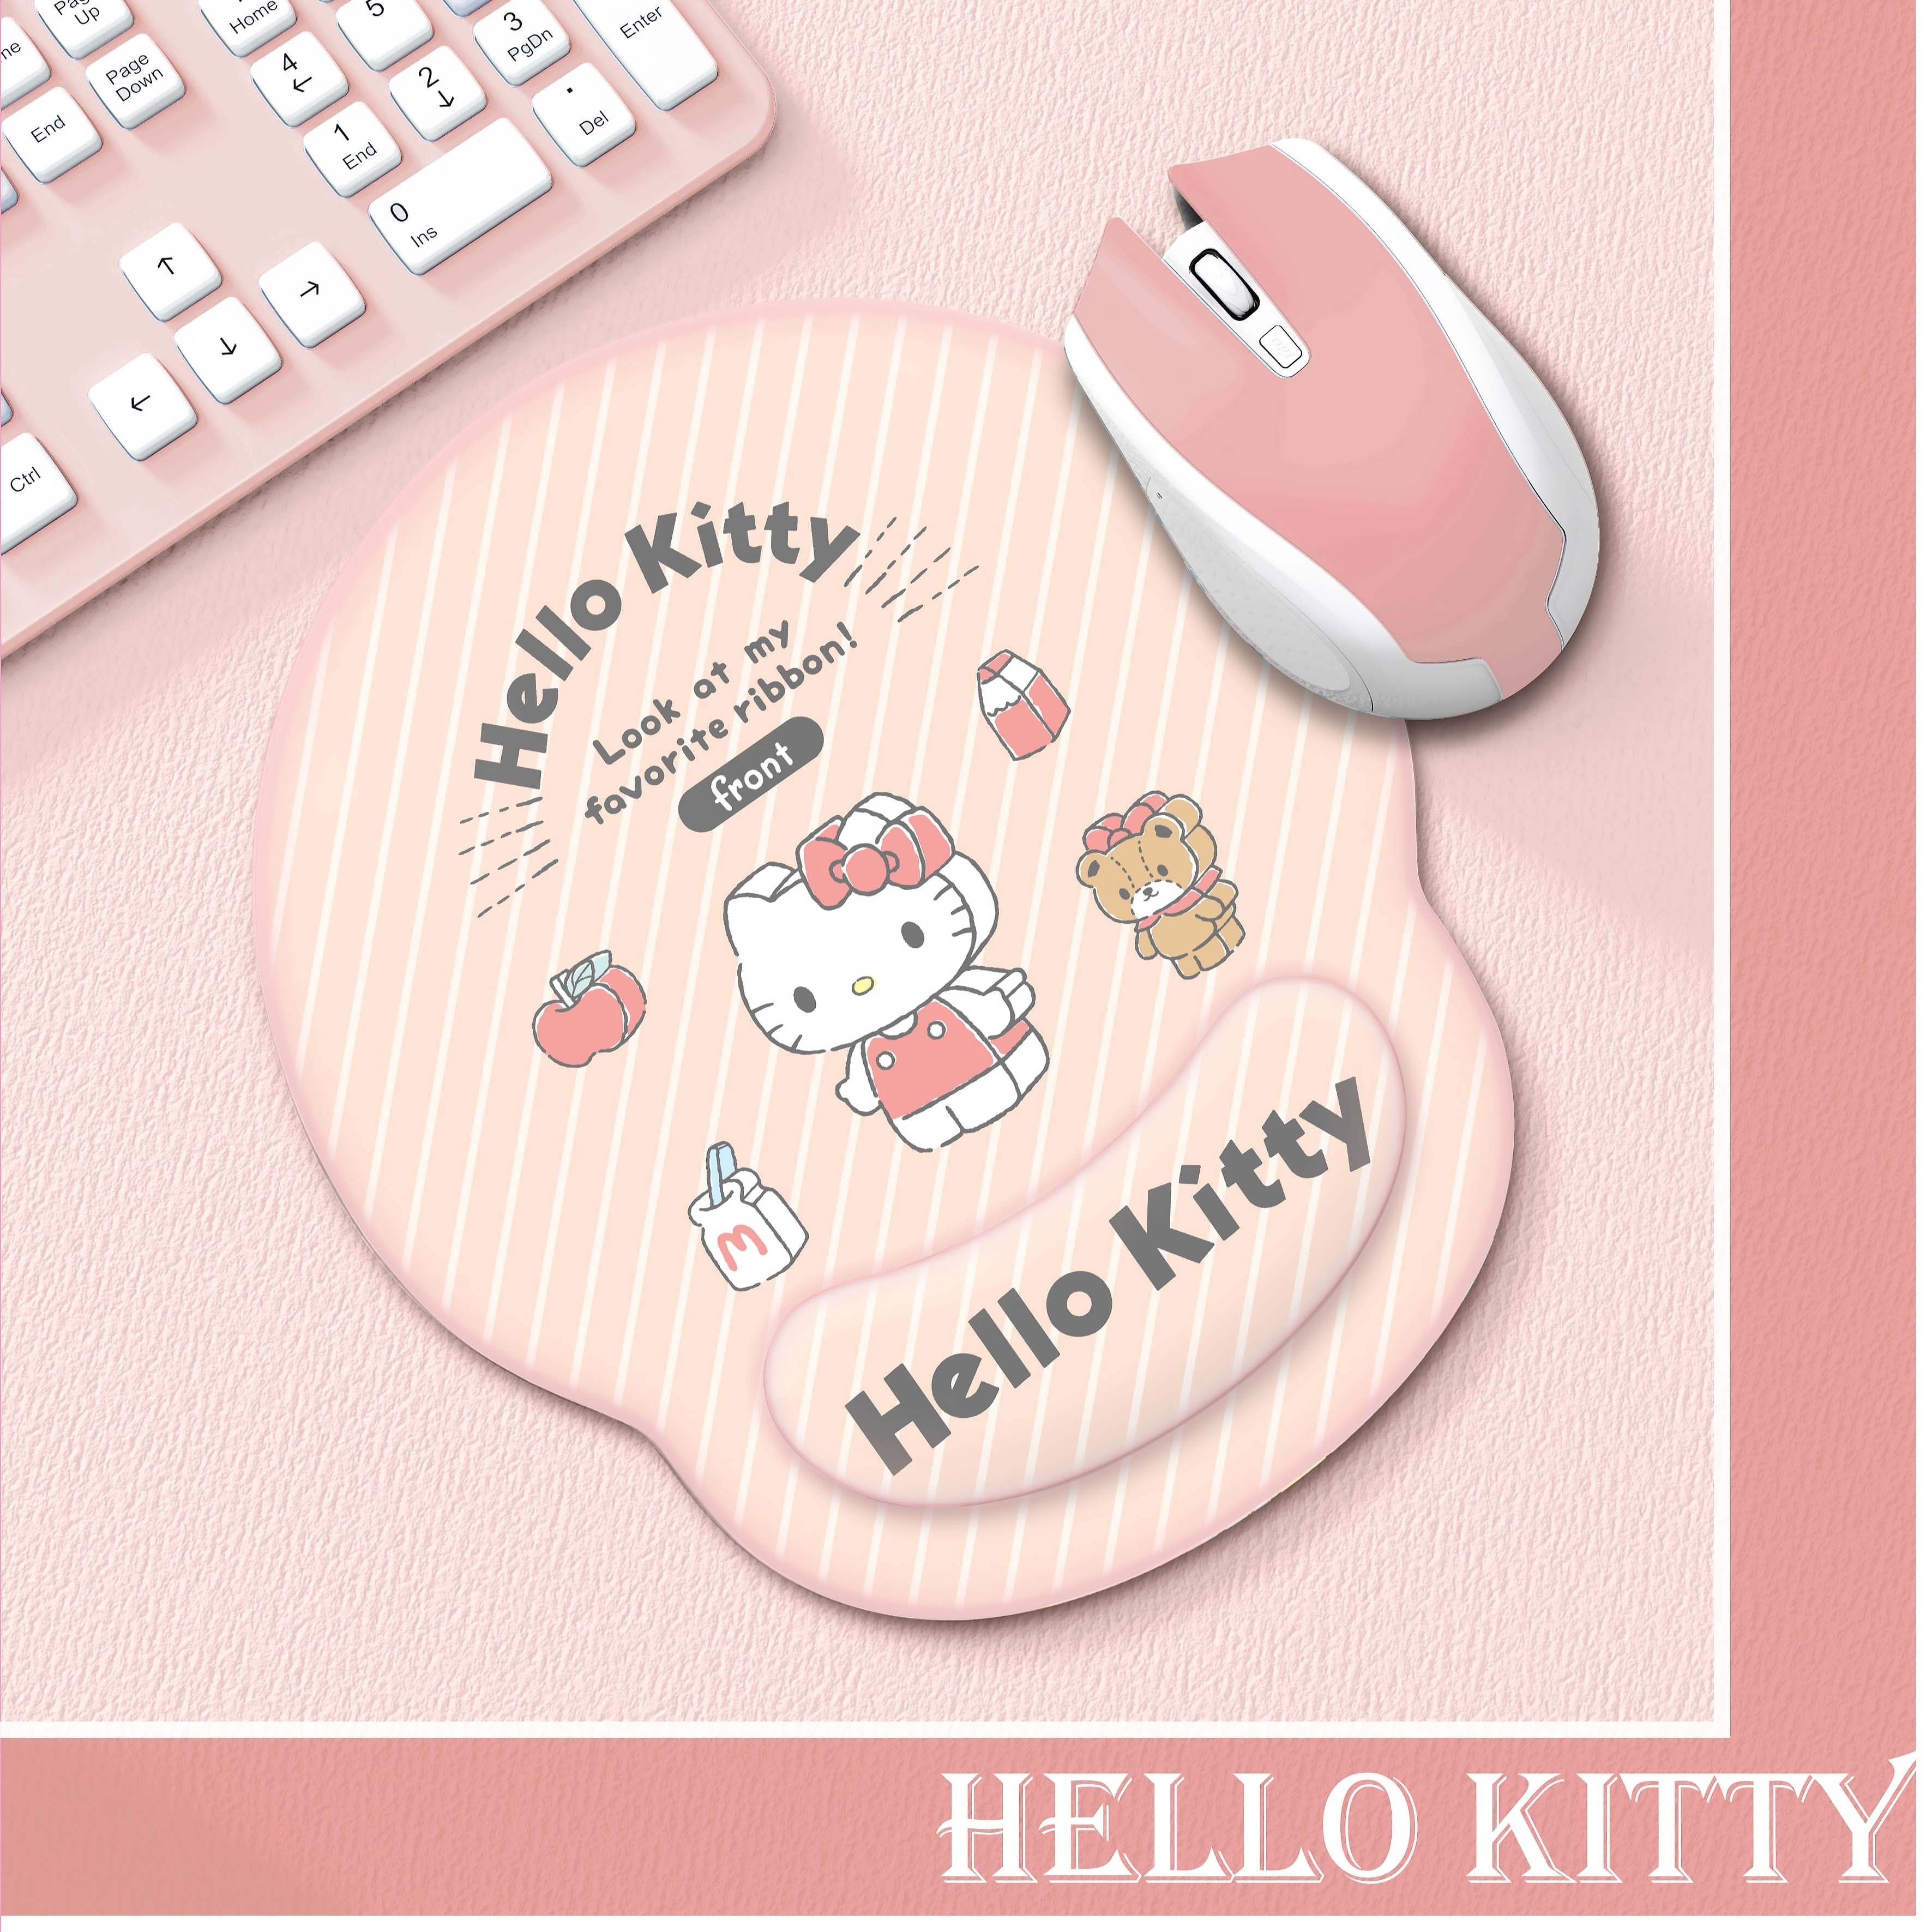 Cute Hello Kitty Mouse Pad Wrist Support, Hello Kitty Desk Accessories  Office Supplies Stuff, Kawaii Mousepad Ergonomic Mouse Pad with Wrist Rest  for